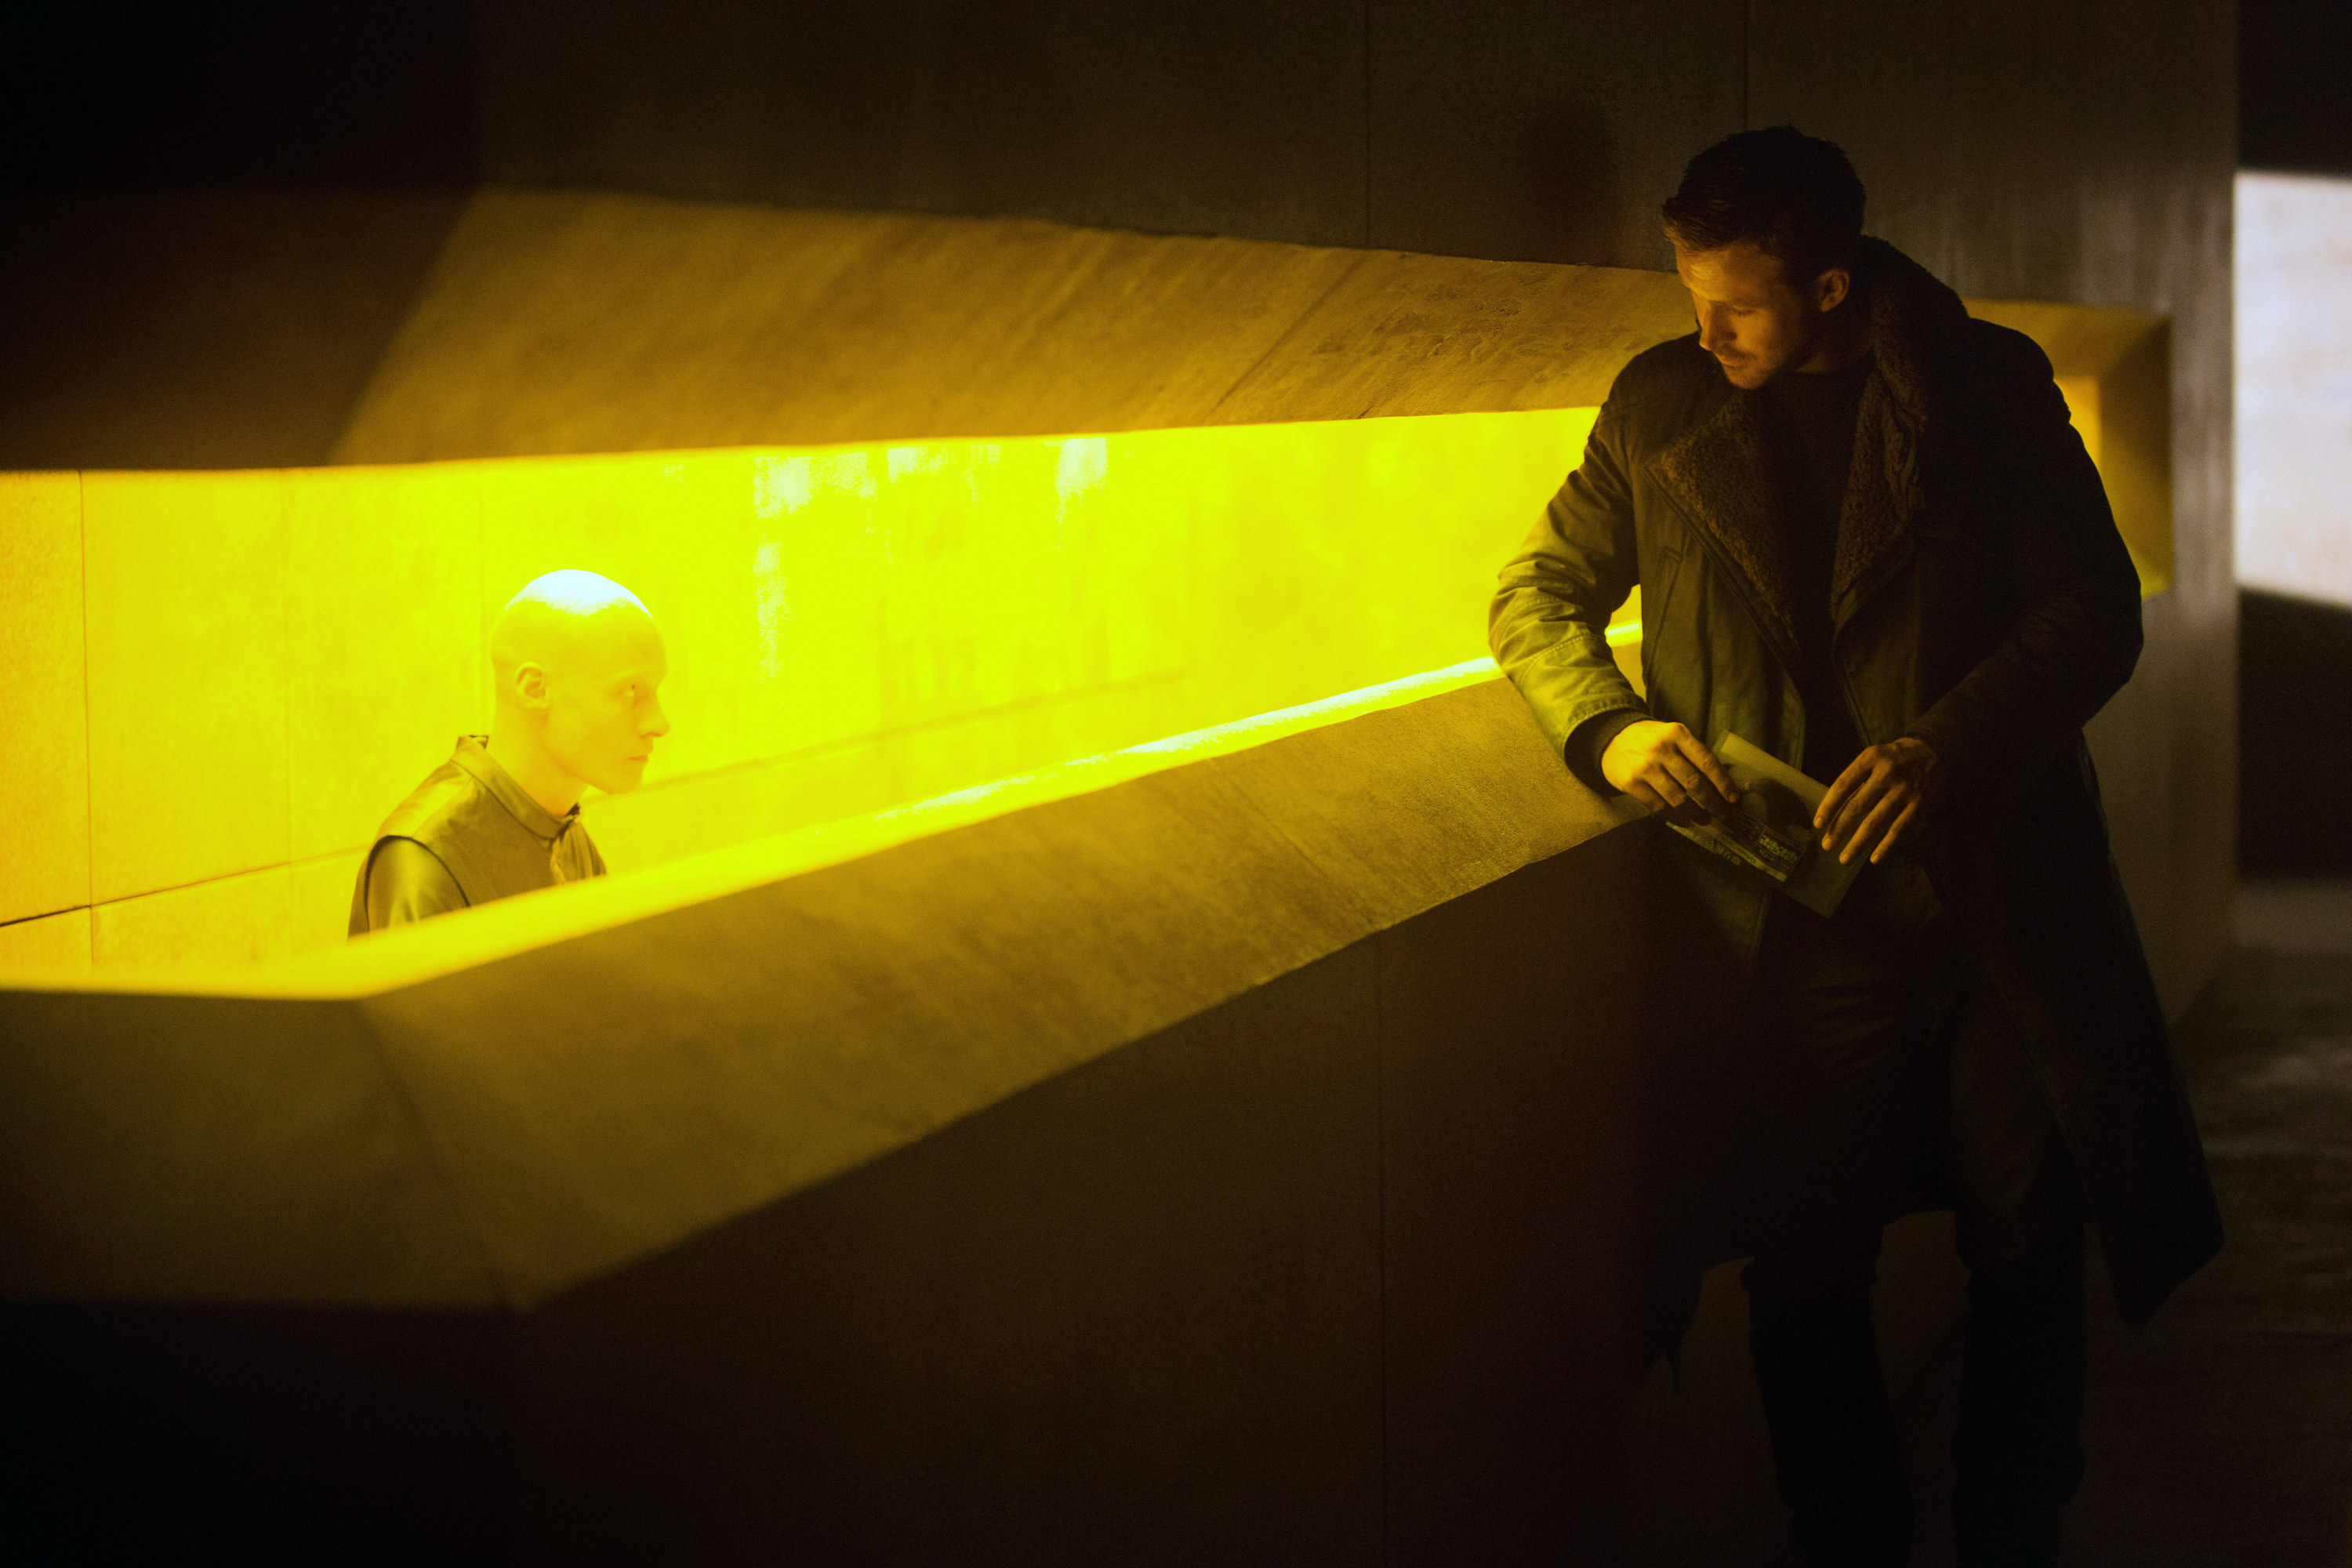 Ryan Gosling at a futuristic office front desk bathed in yellow light